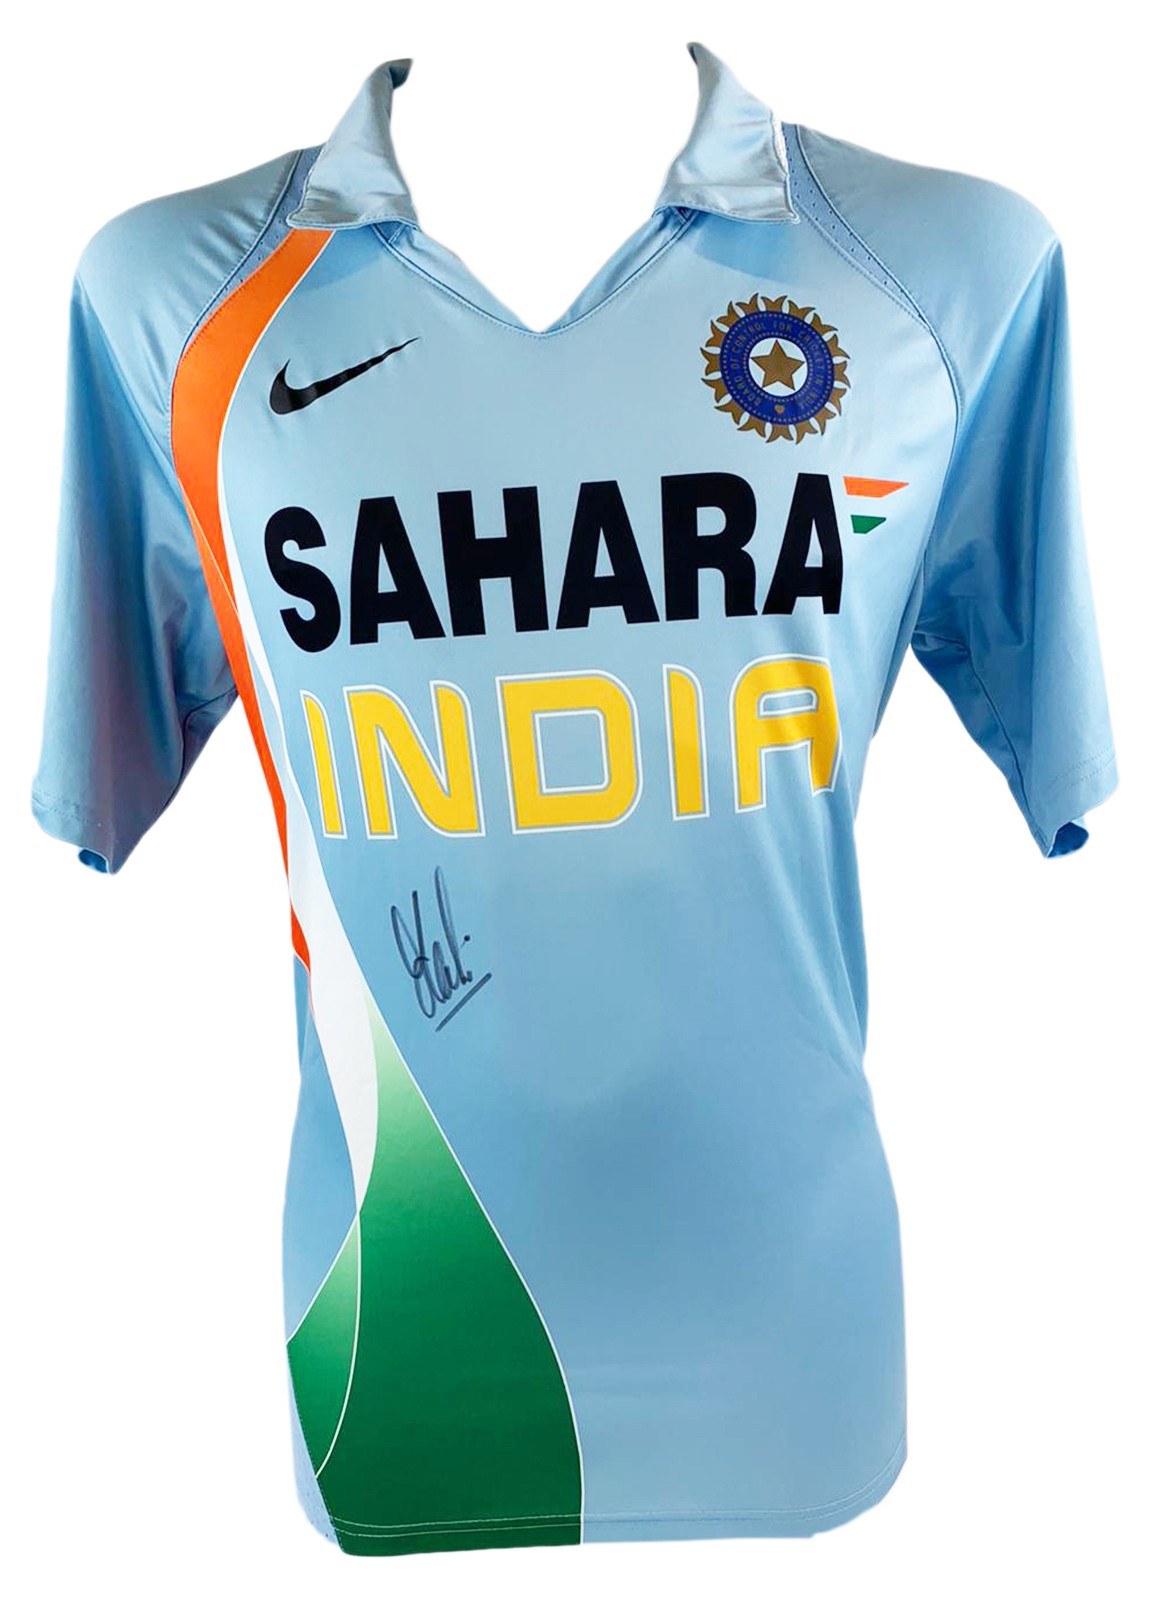 ms dhoni jersey buy online